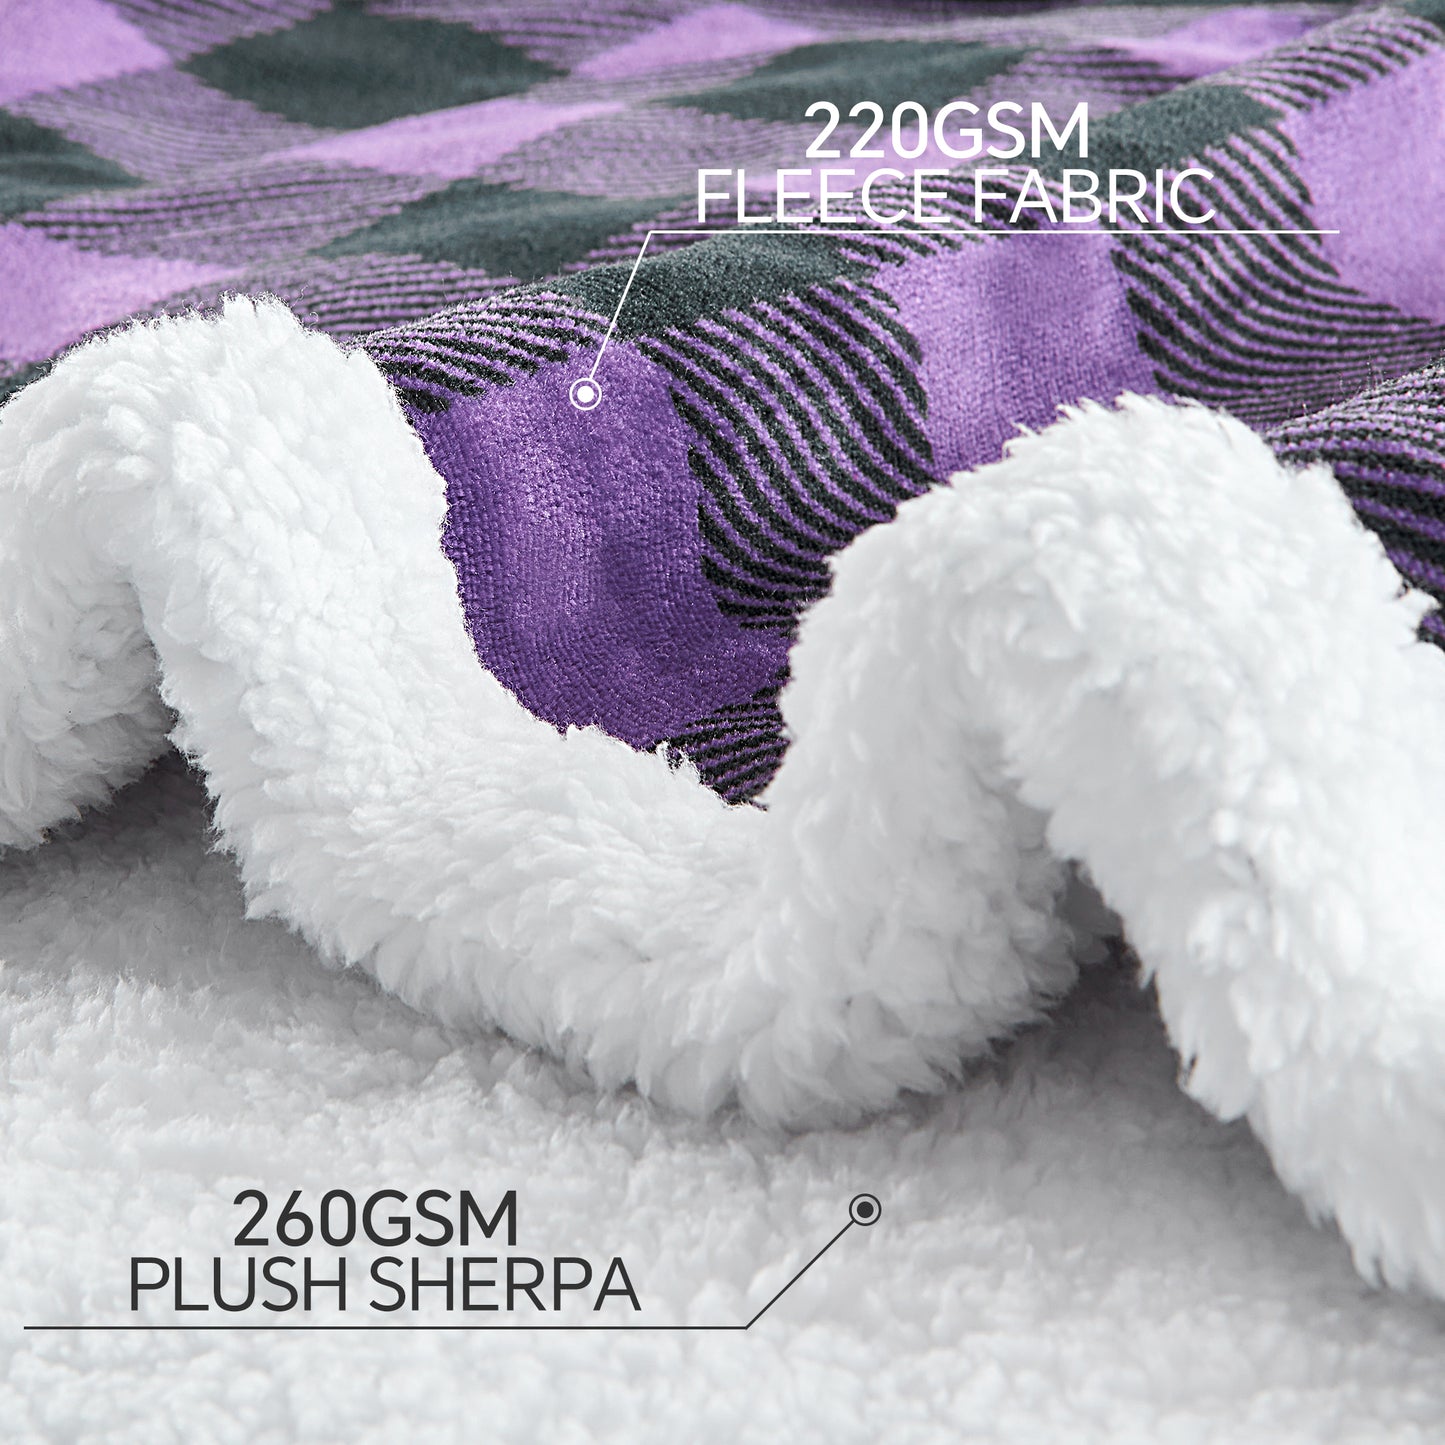 Sherpa Fleece Blanket - Buffalo Plaid Christmas Blanket, Super Soft Cozy Warm Thick Winter Throw Blankets for Couch and Bed